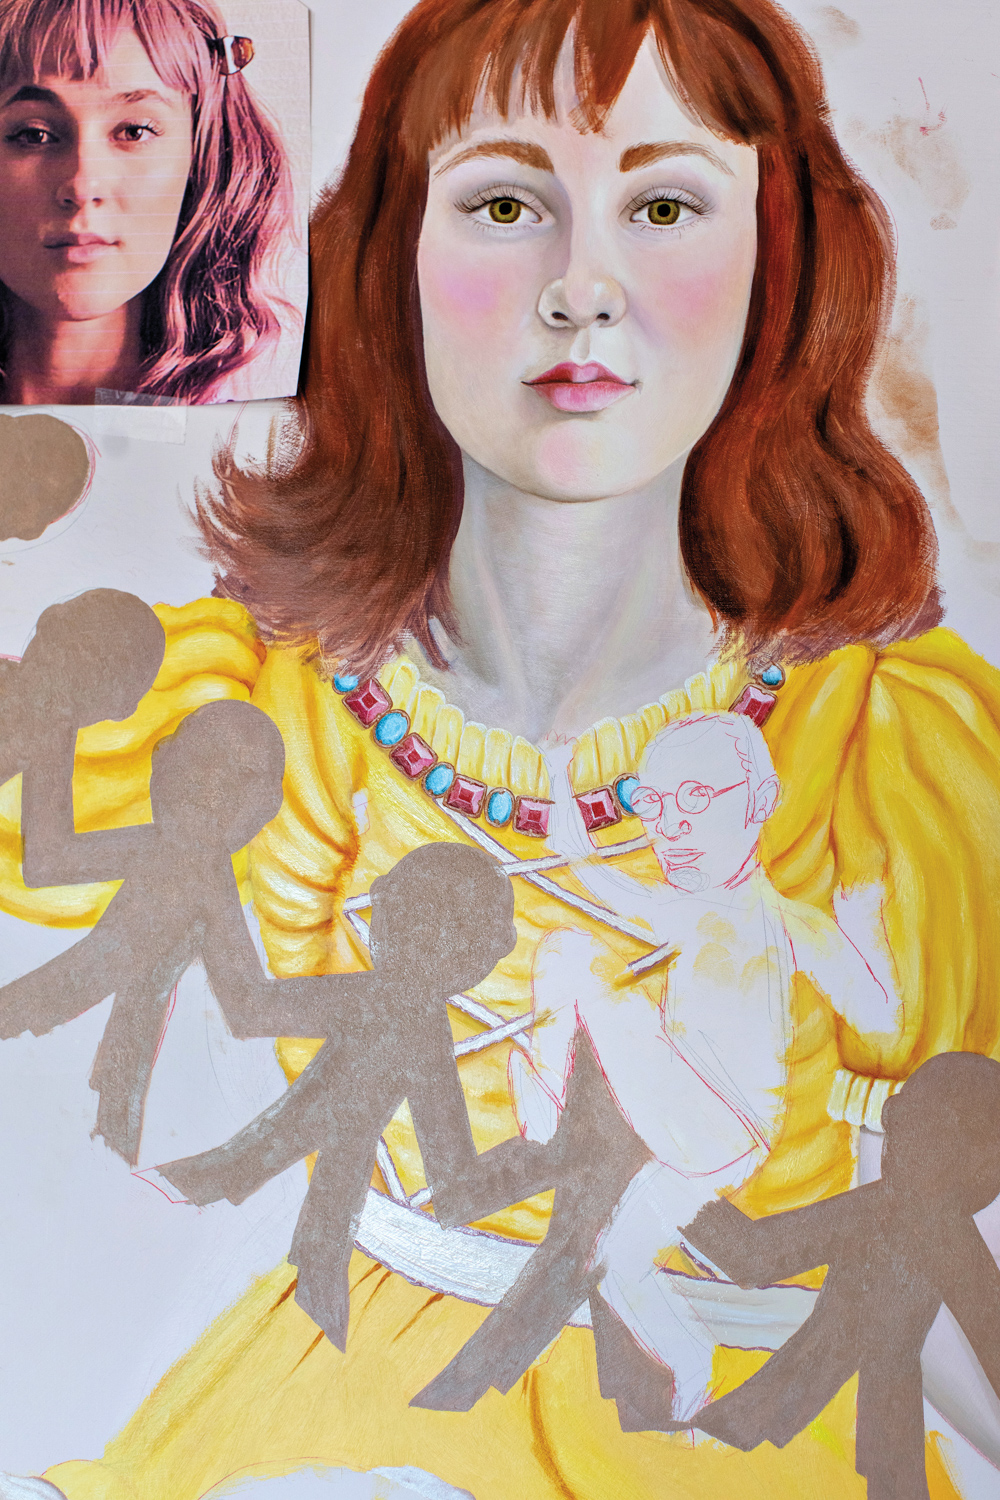 A painting of a girl in a yellow dress holding paper cut outs. A smaller picture of the girl hangs next to the painting.